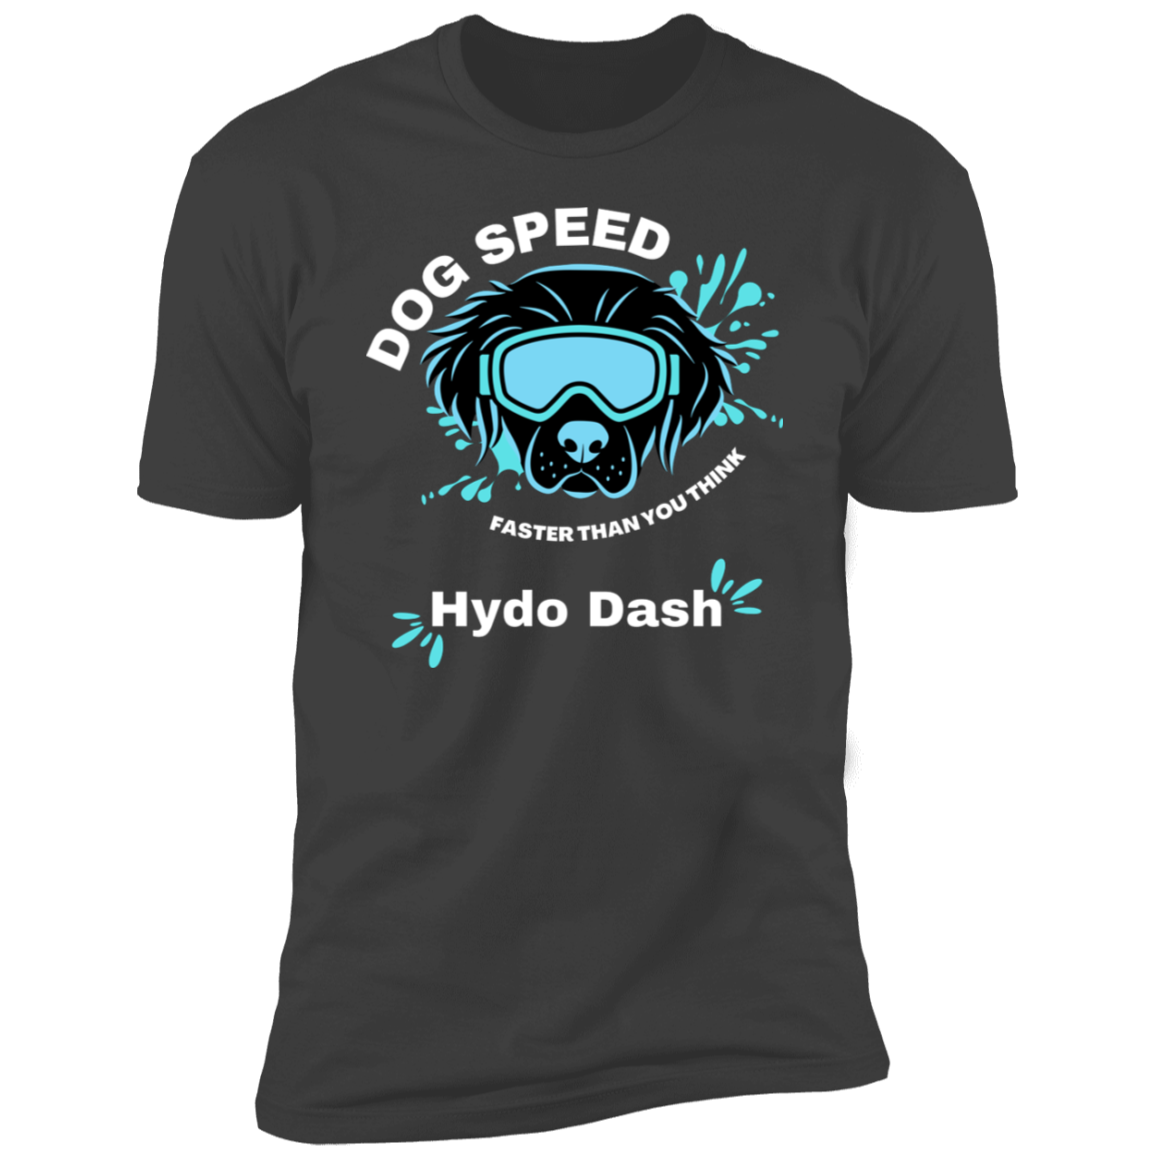 Dog Speed Faster Than You Think Hydro Dash T-shirt, Hydro Dash shirt dog shirt for humans, in heavy metal gray